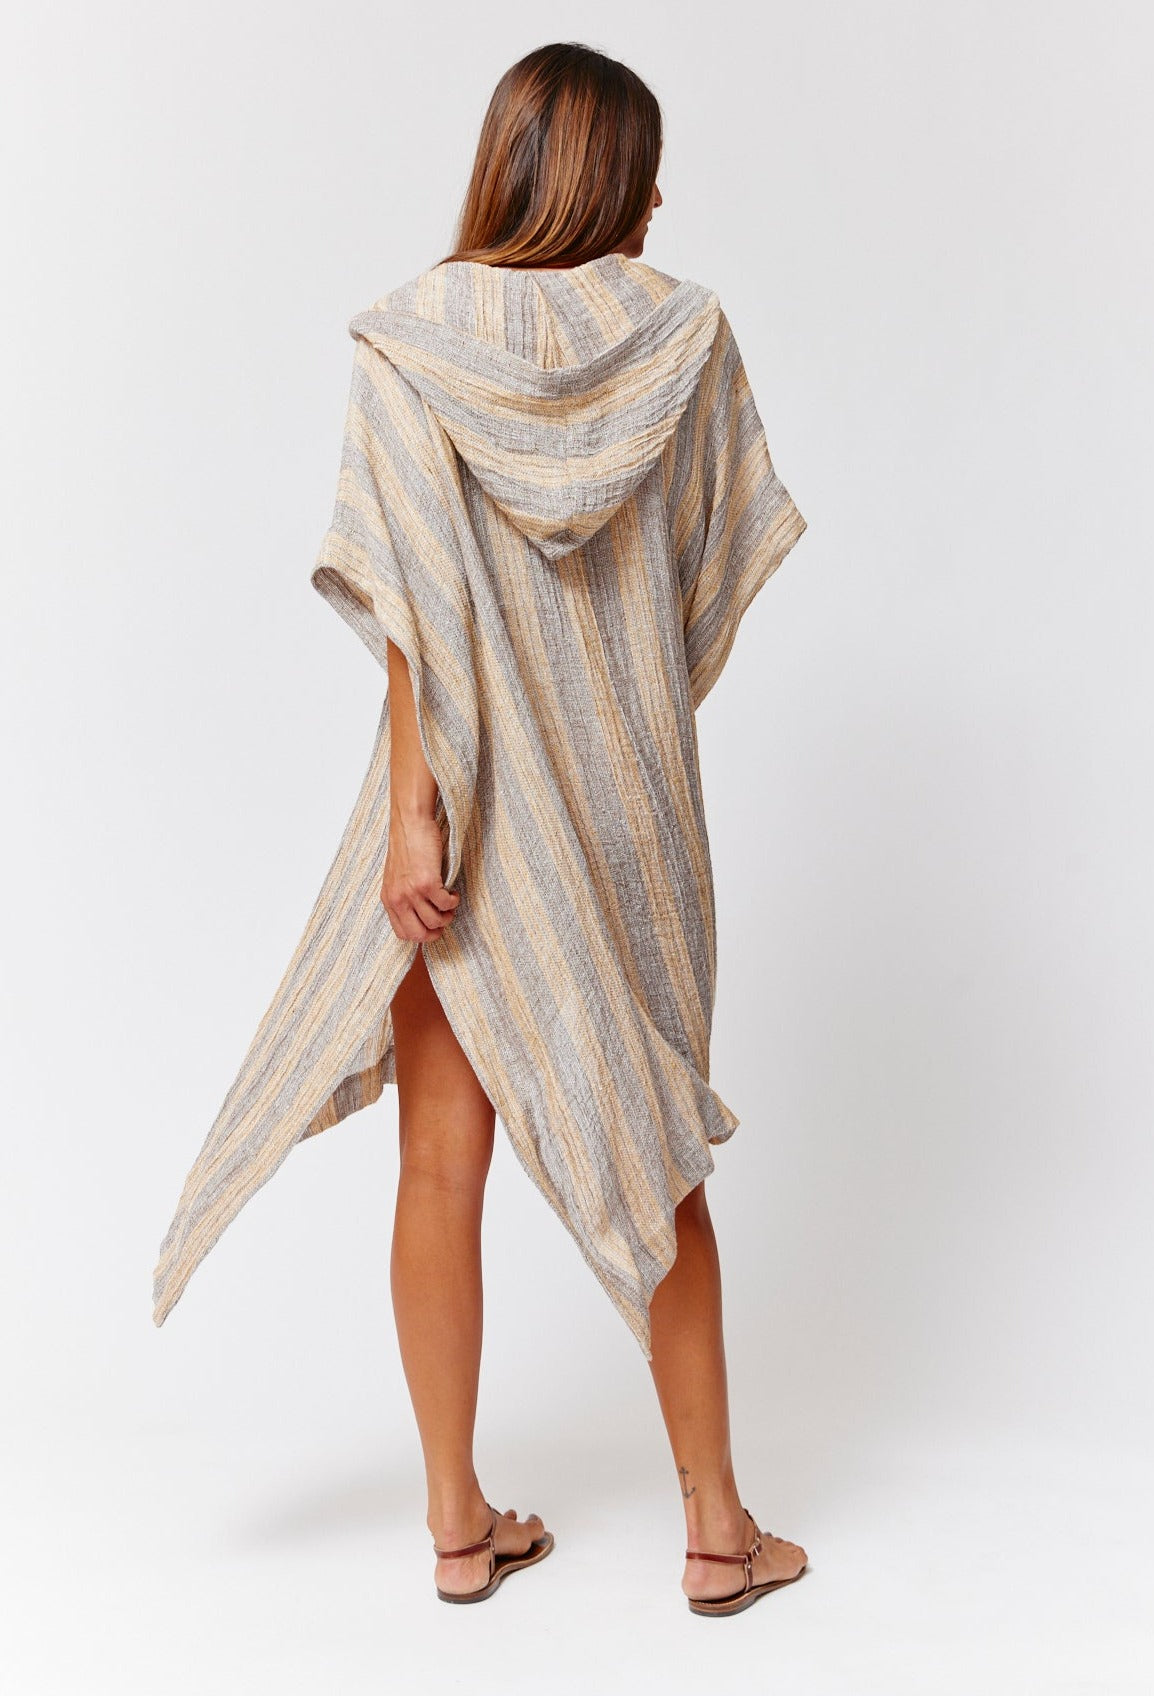 THE BEACH PONCHO in SIENA & NATURAL STRIPED CHIOS GAUZE